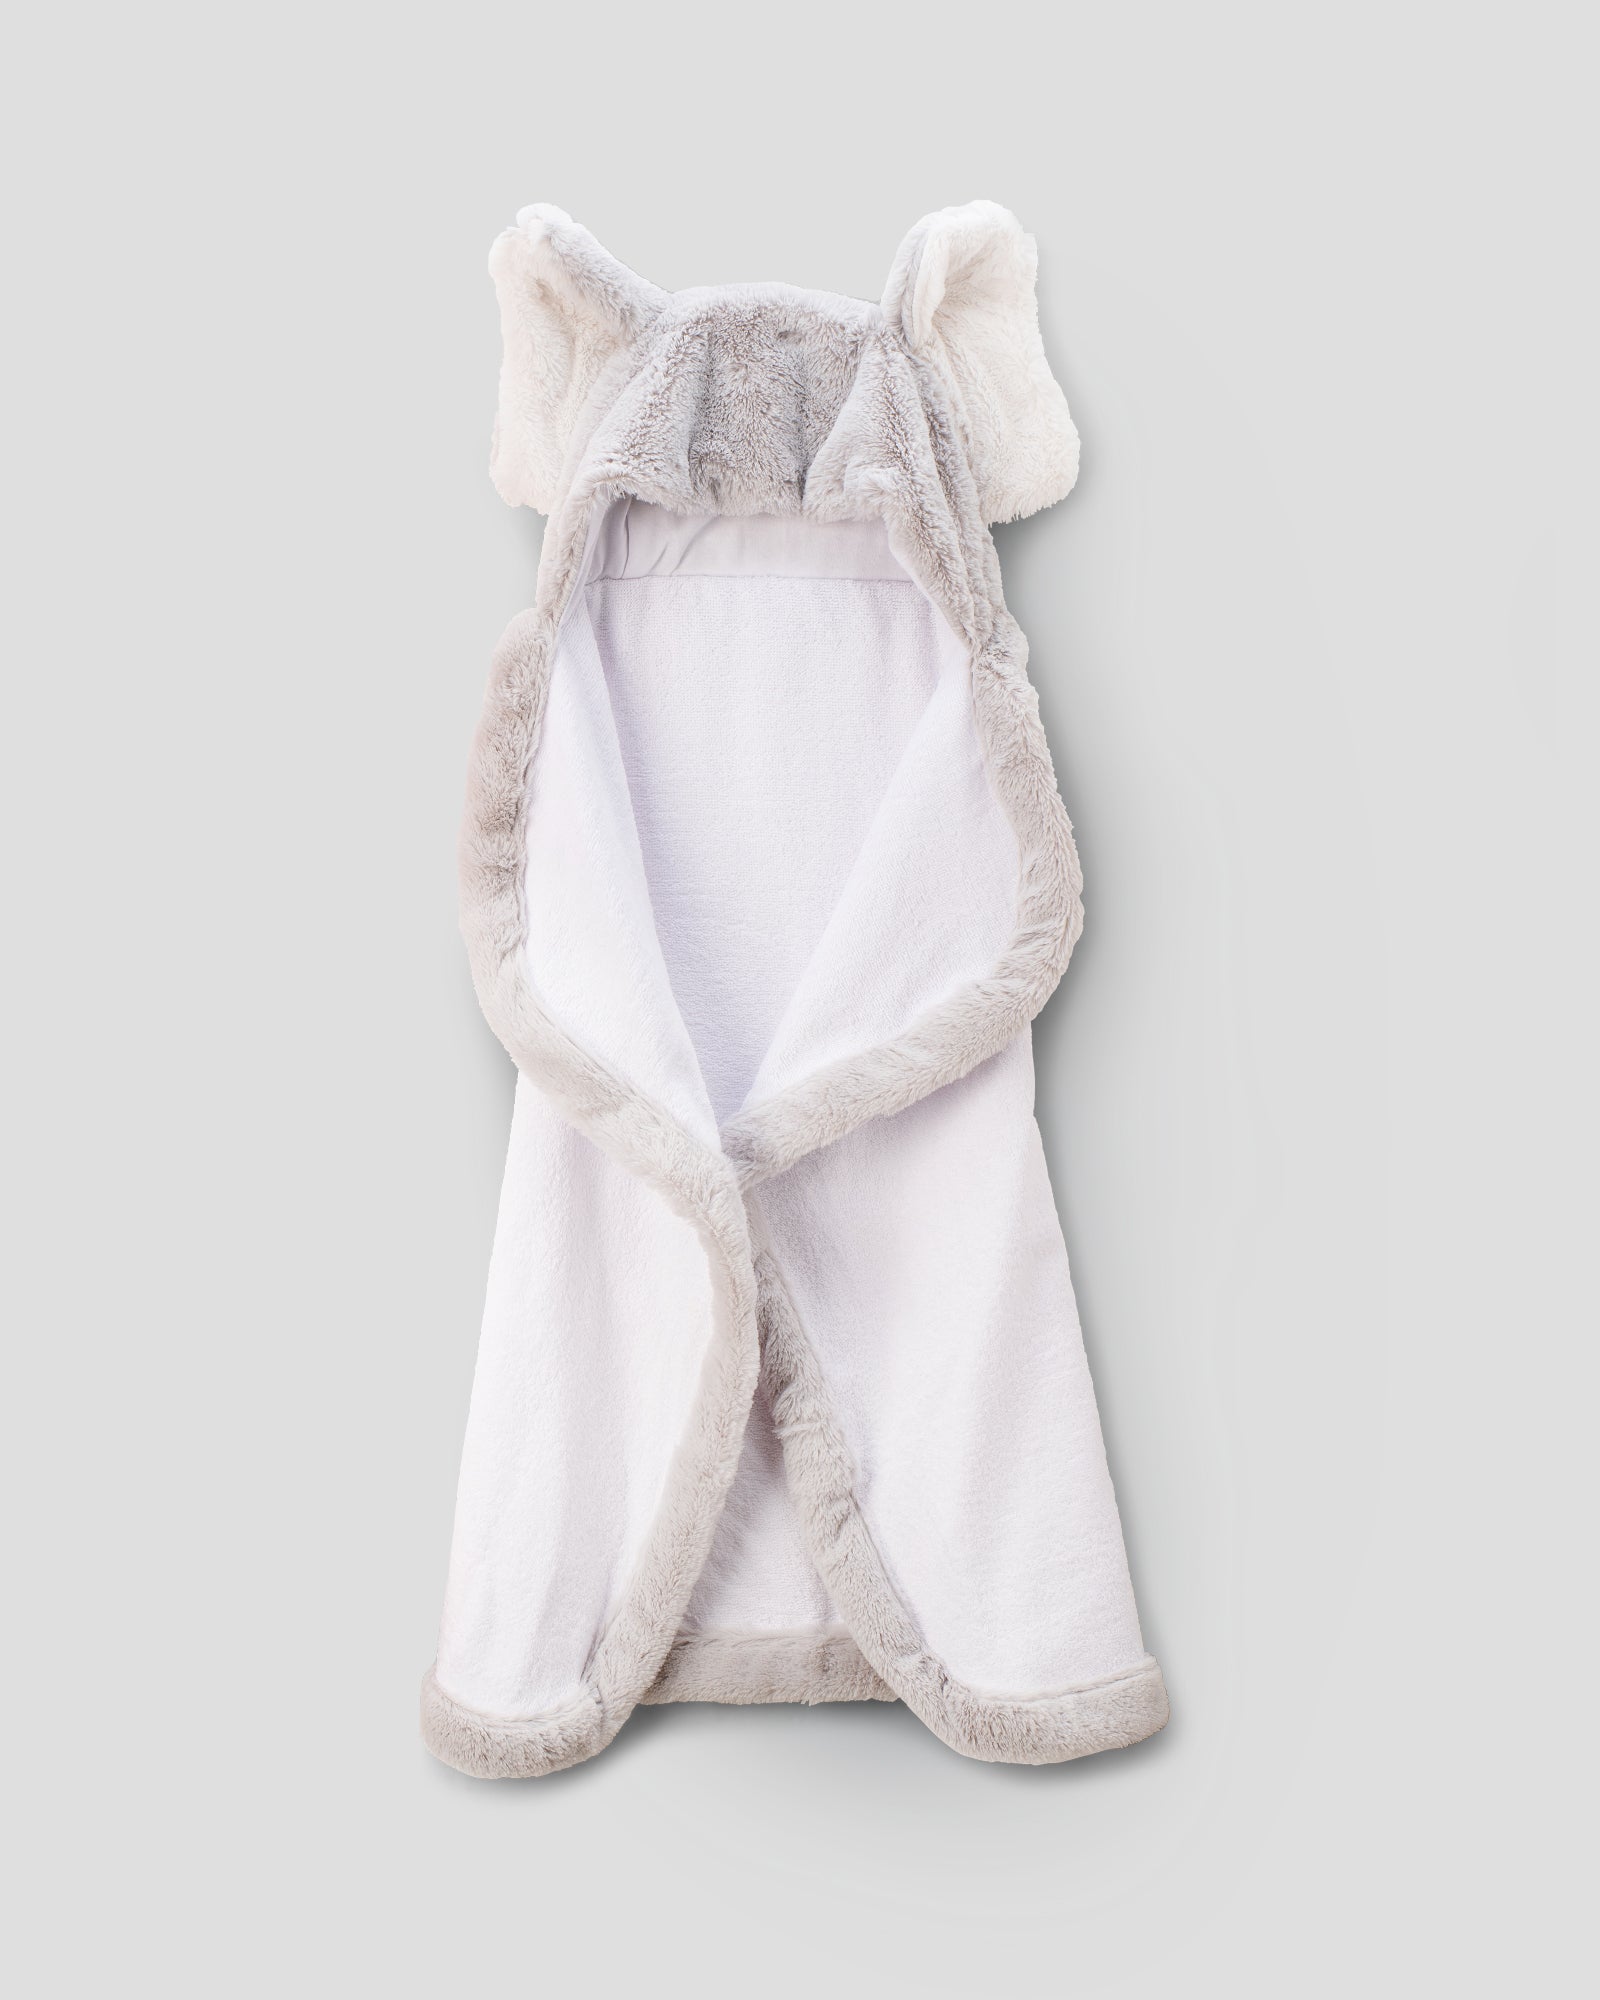 The Little Linen Company Baby Hooded Towel - Soft Grey